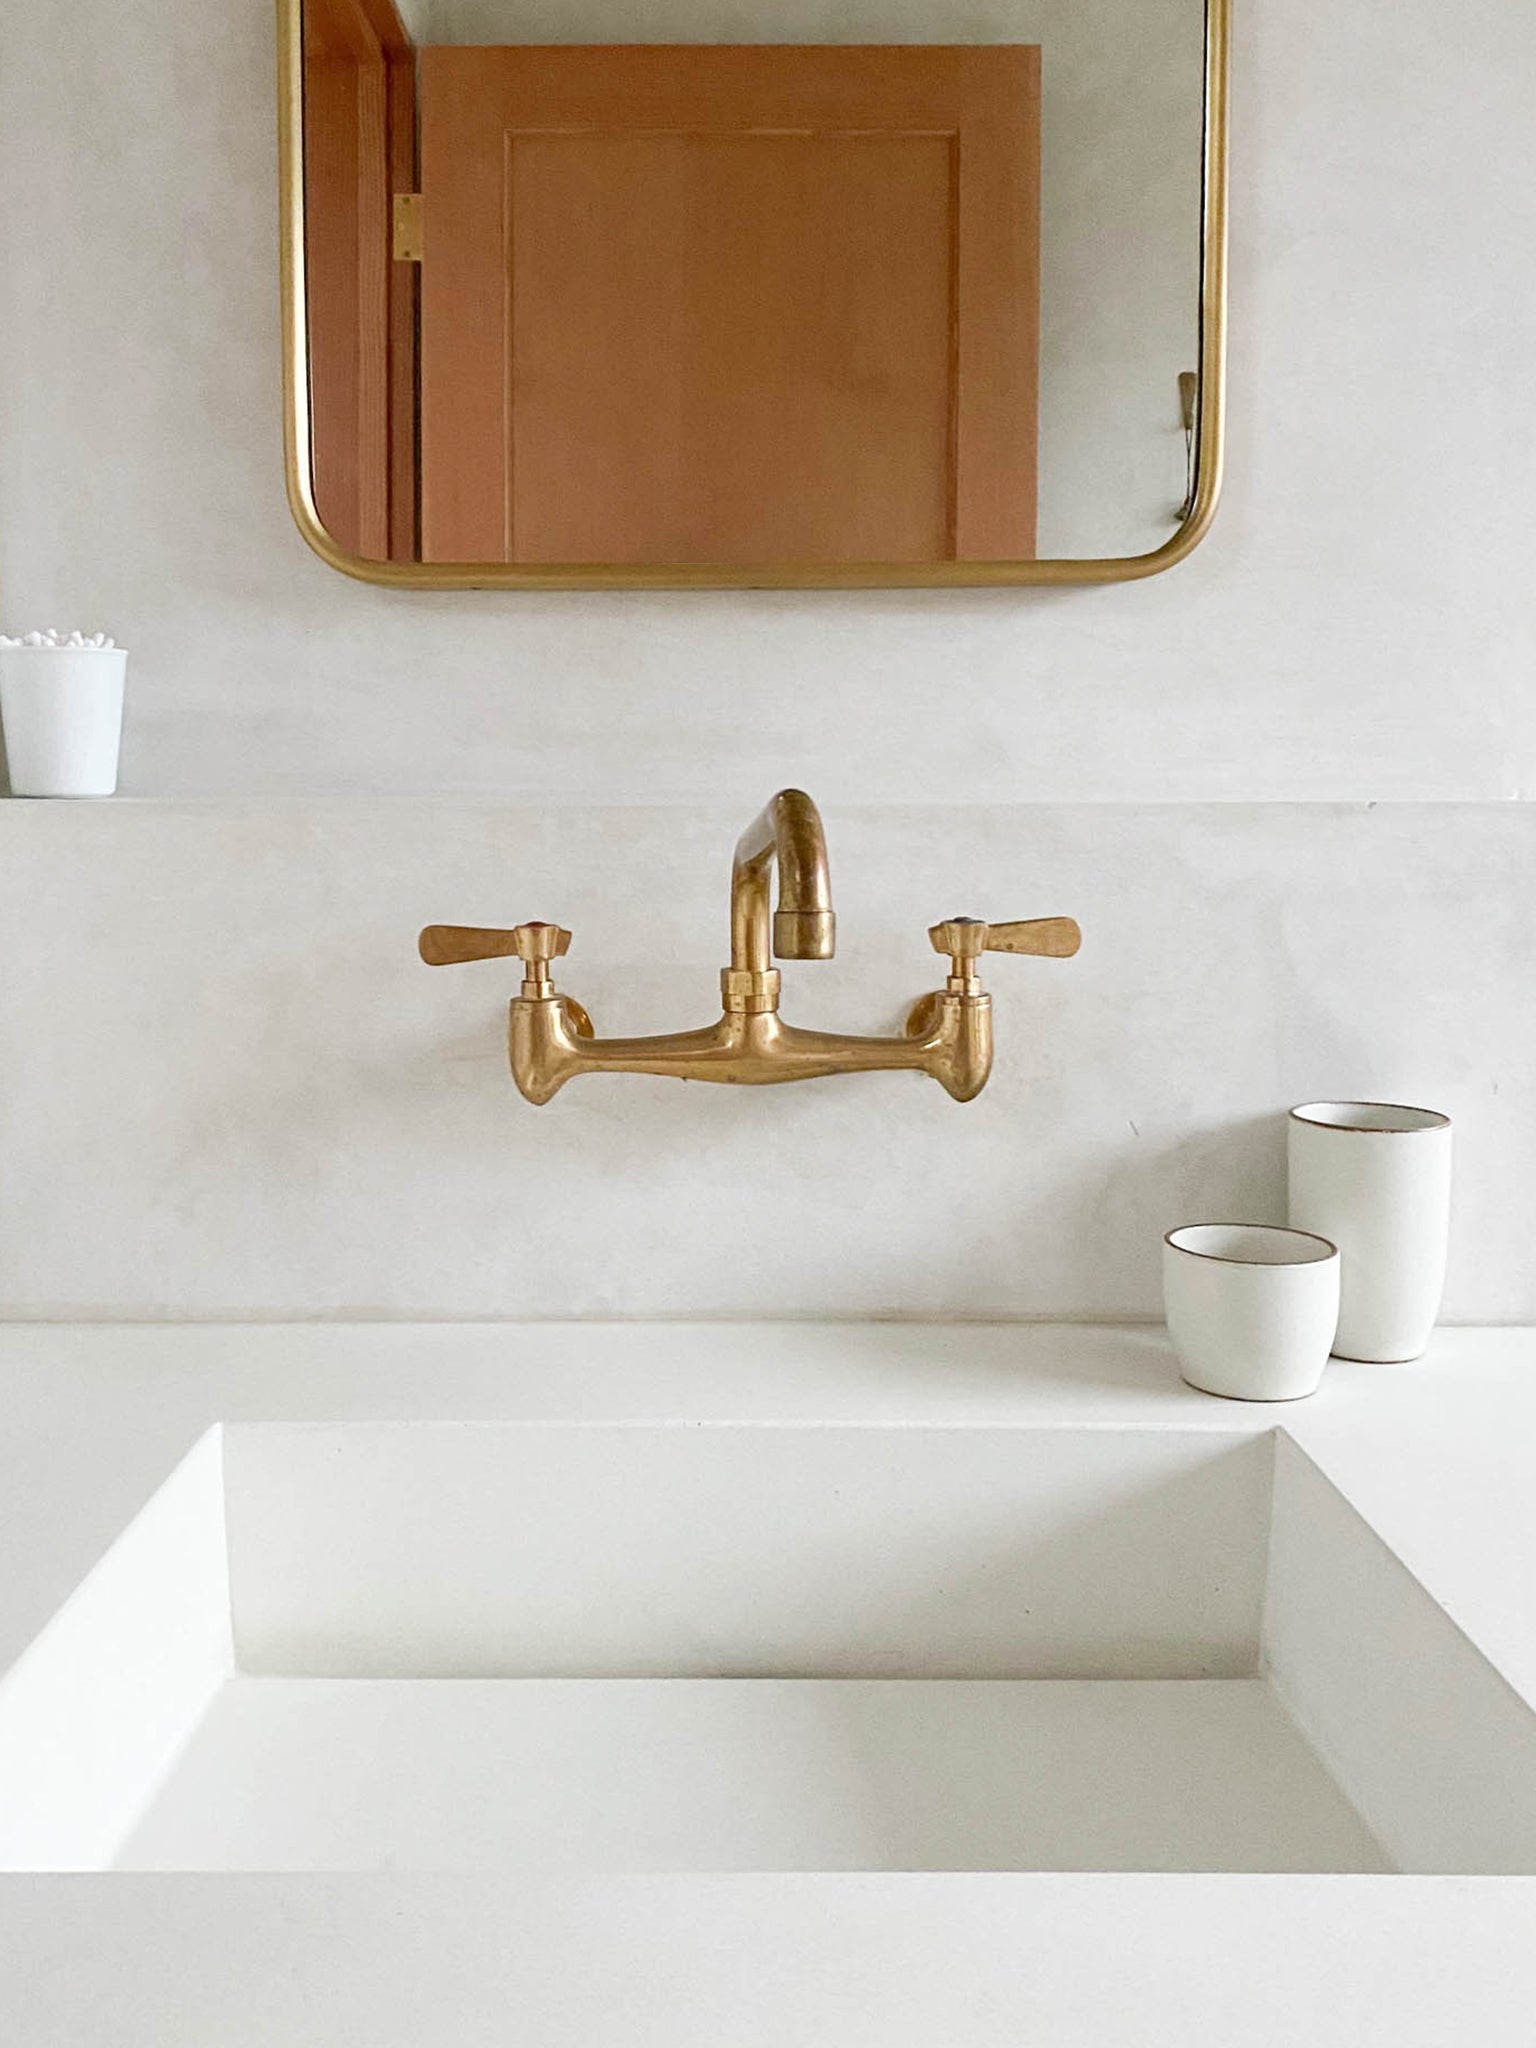 Kinto Nori Tumbler Large and Small on countertop with brass faucet and brass mirror | lifestyle